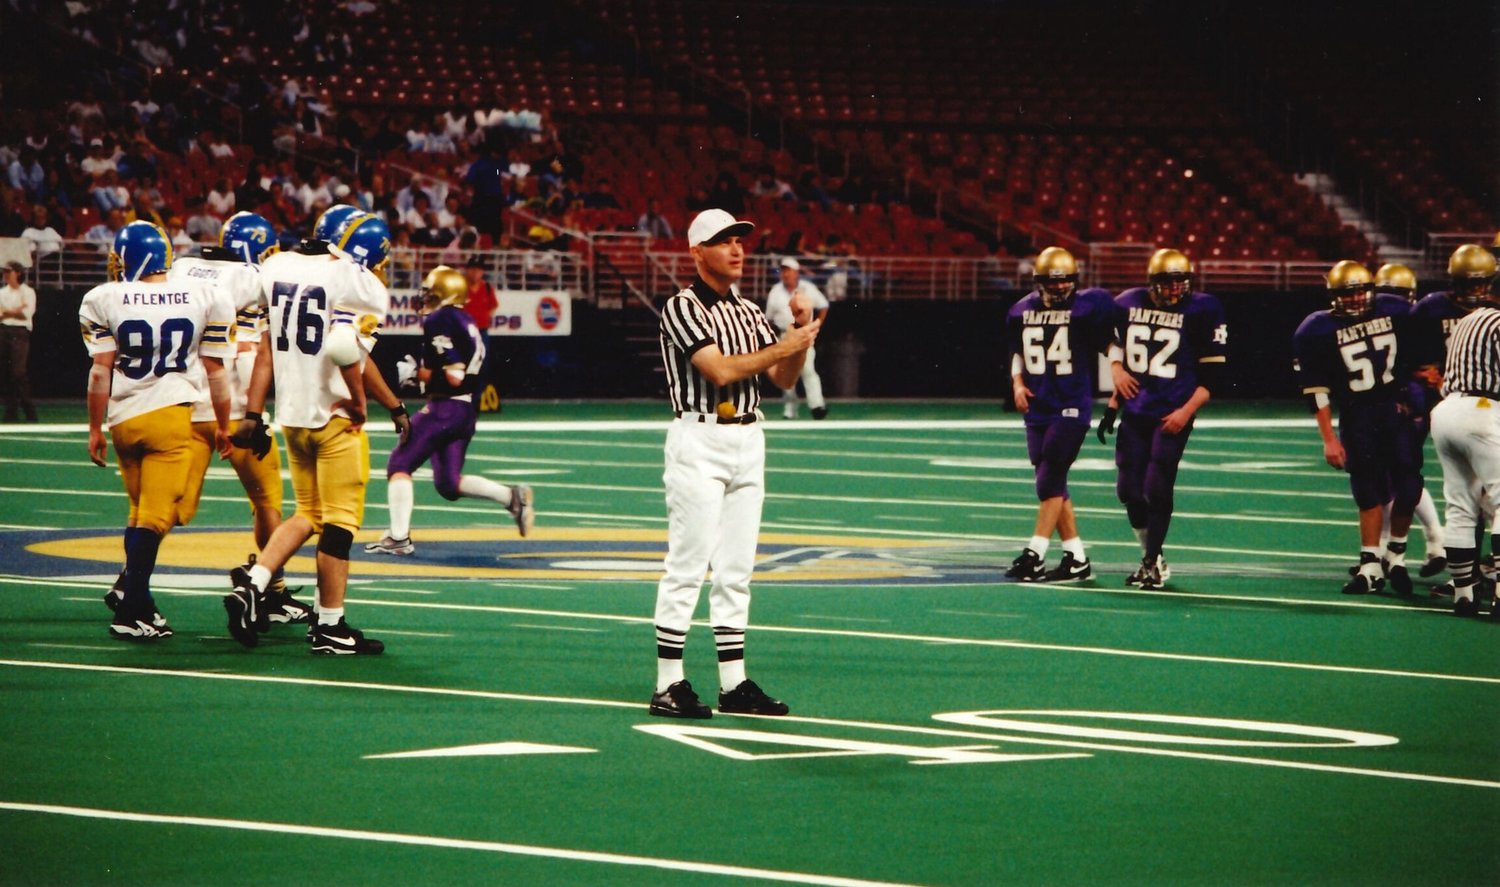 Salisbury native David Sturm officiates Missouri’s Class 1 State Championship Game in November 1998 in The Dome at America’s Center in St. Louis.